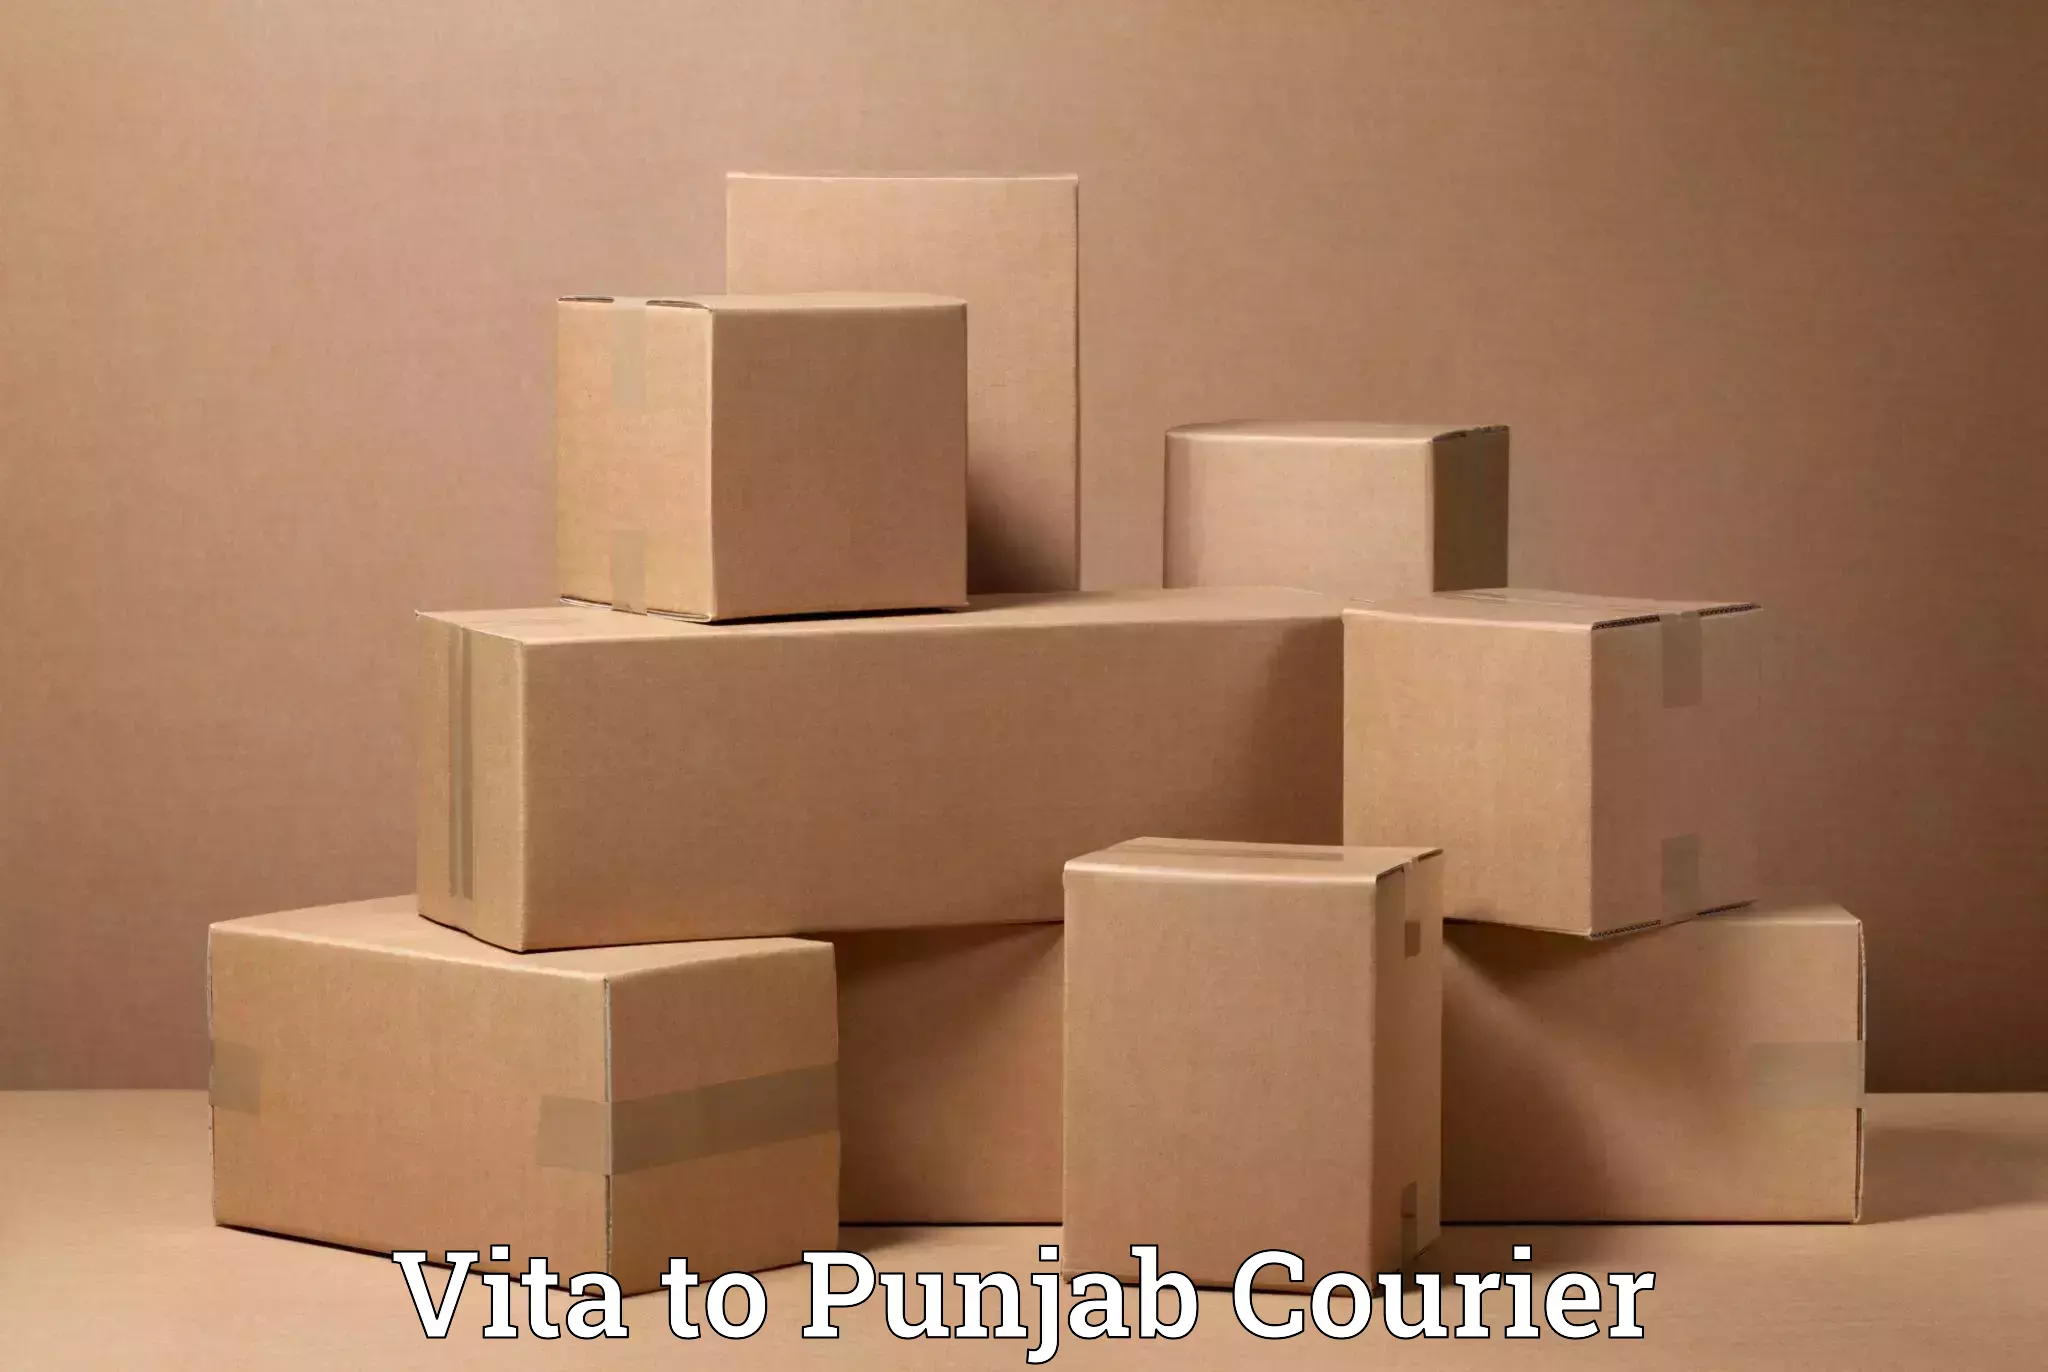 Professional movers and packers Vita to Punjab